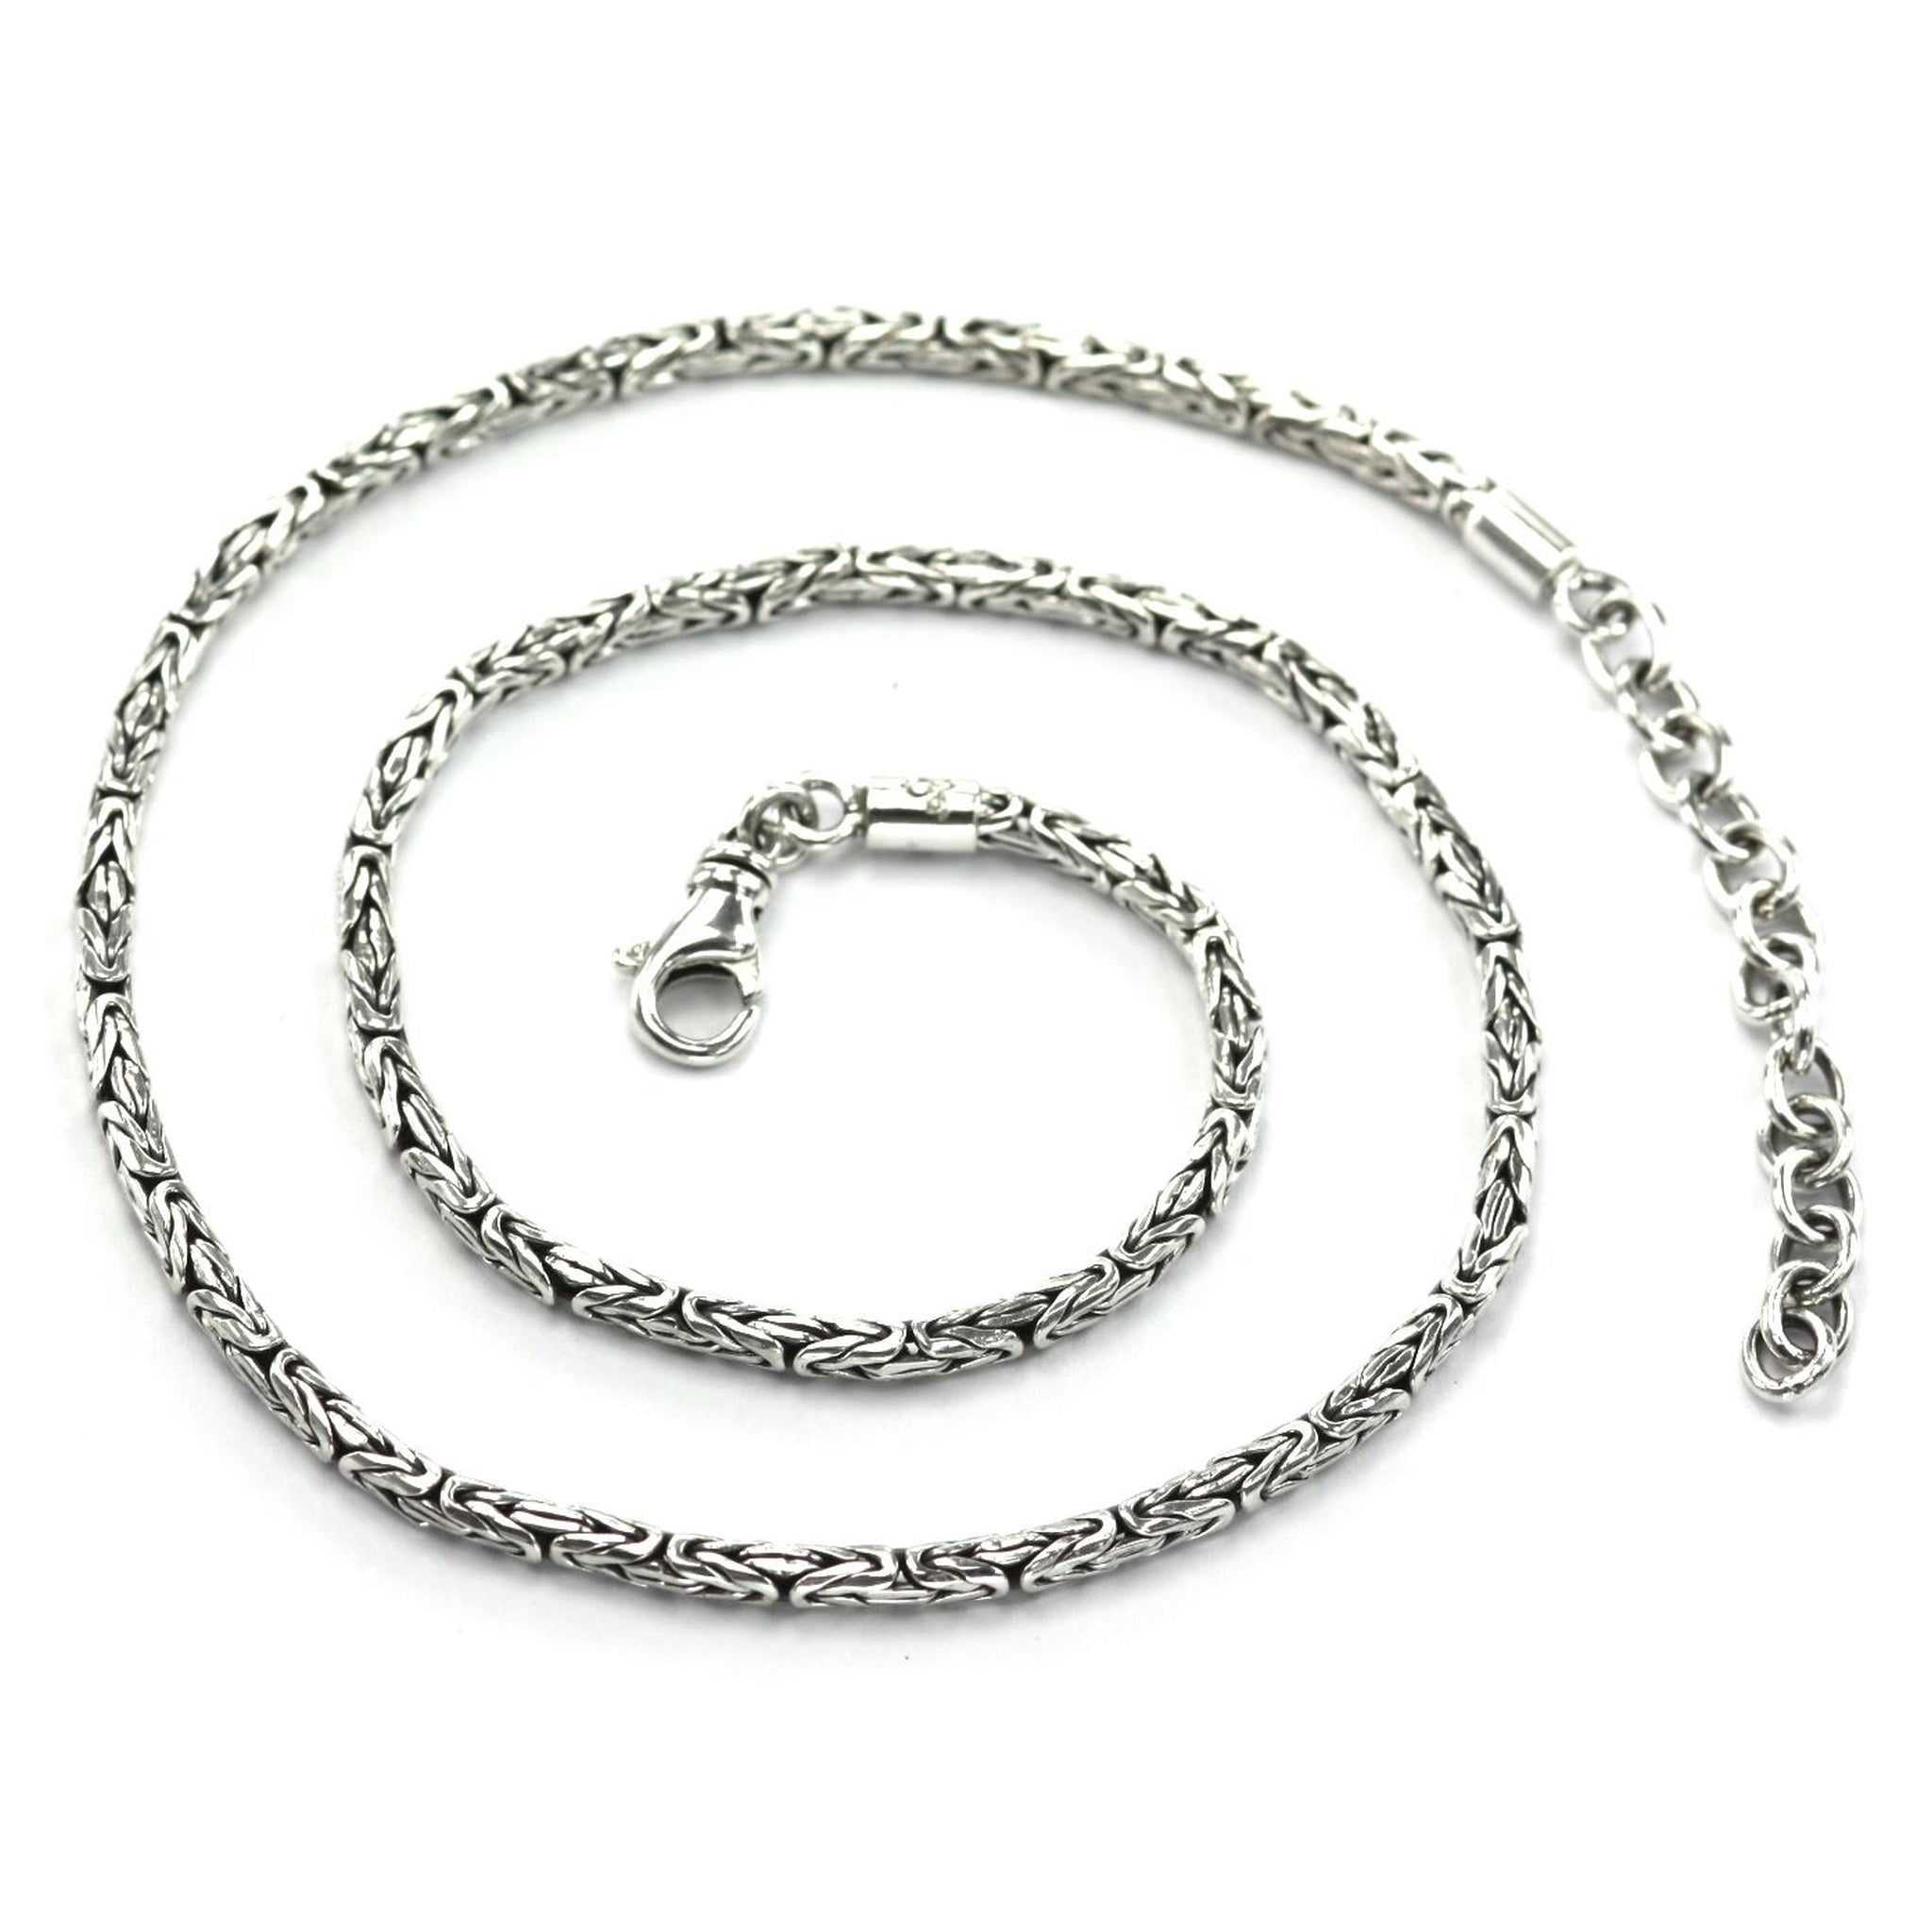 Square Byzantine Solid Sterling Silver Hallmarked Chain - 4mm Width Link